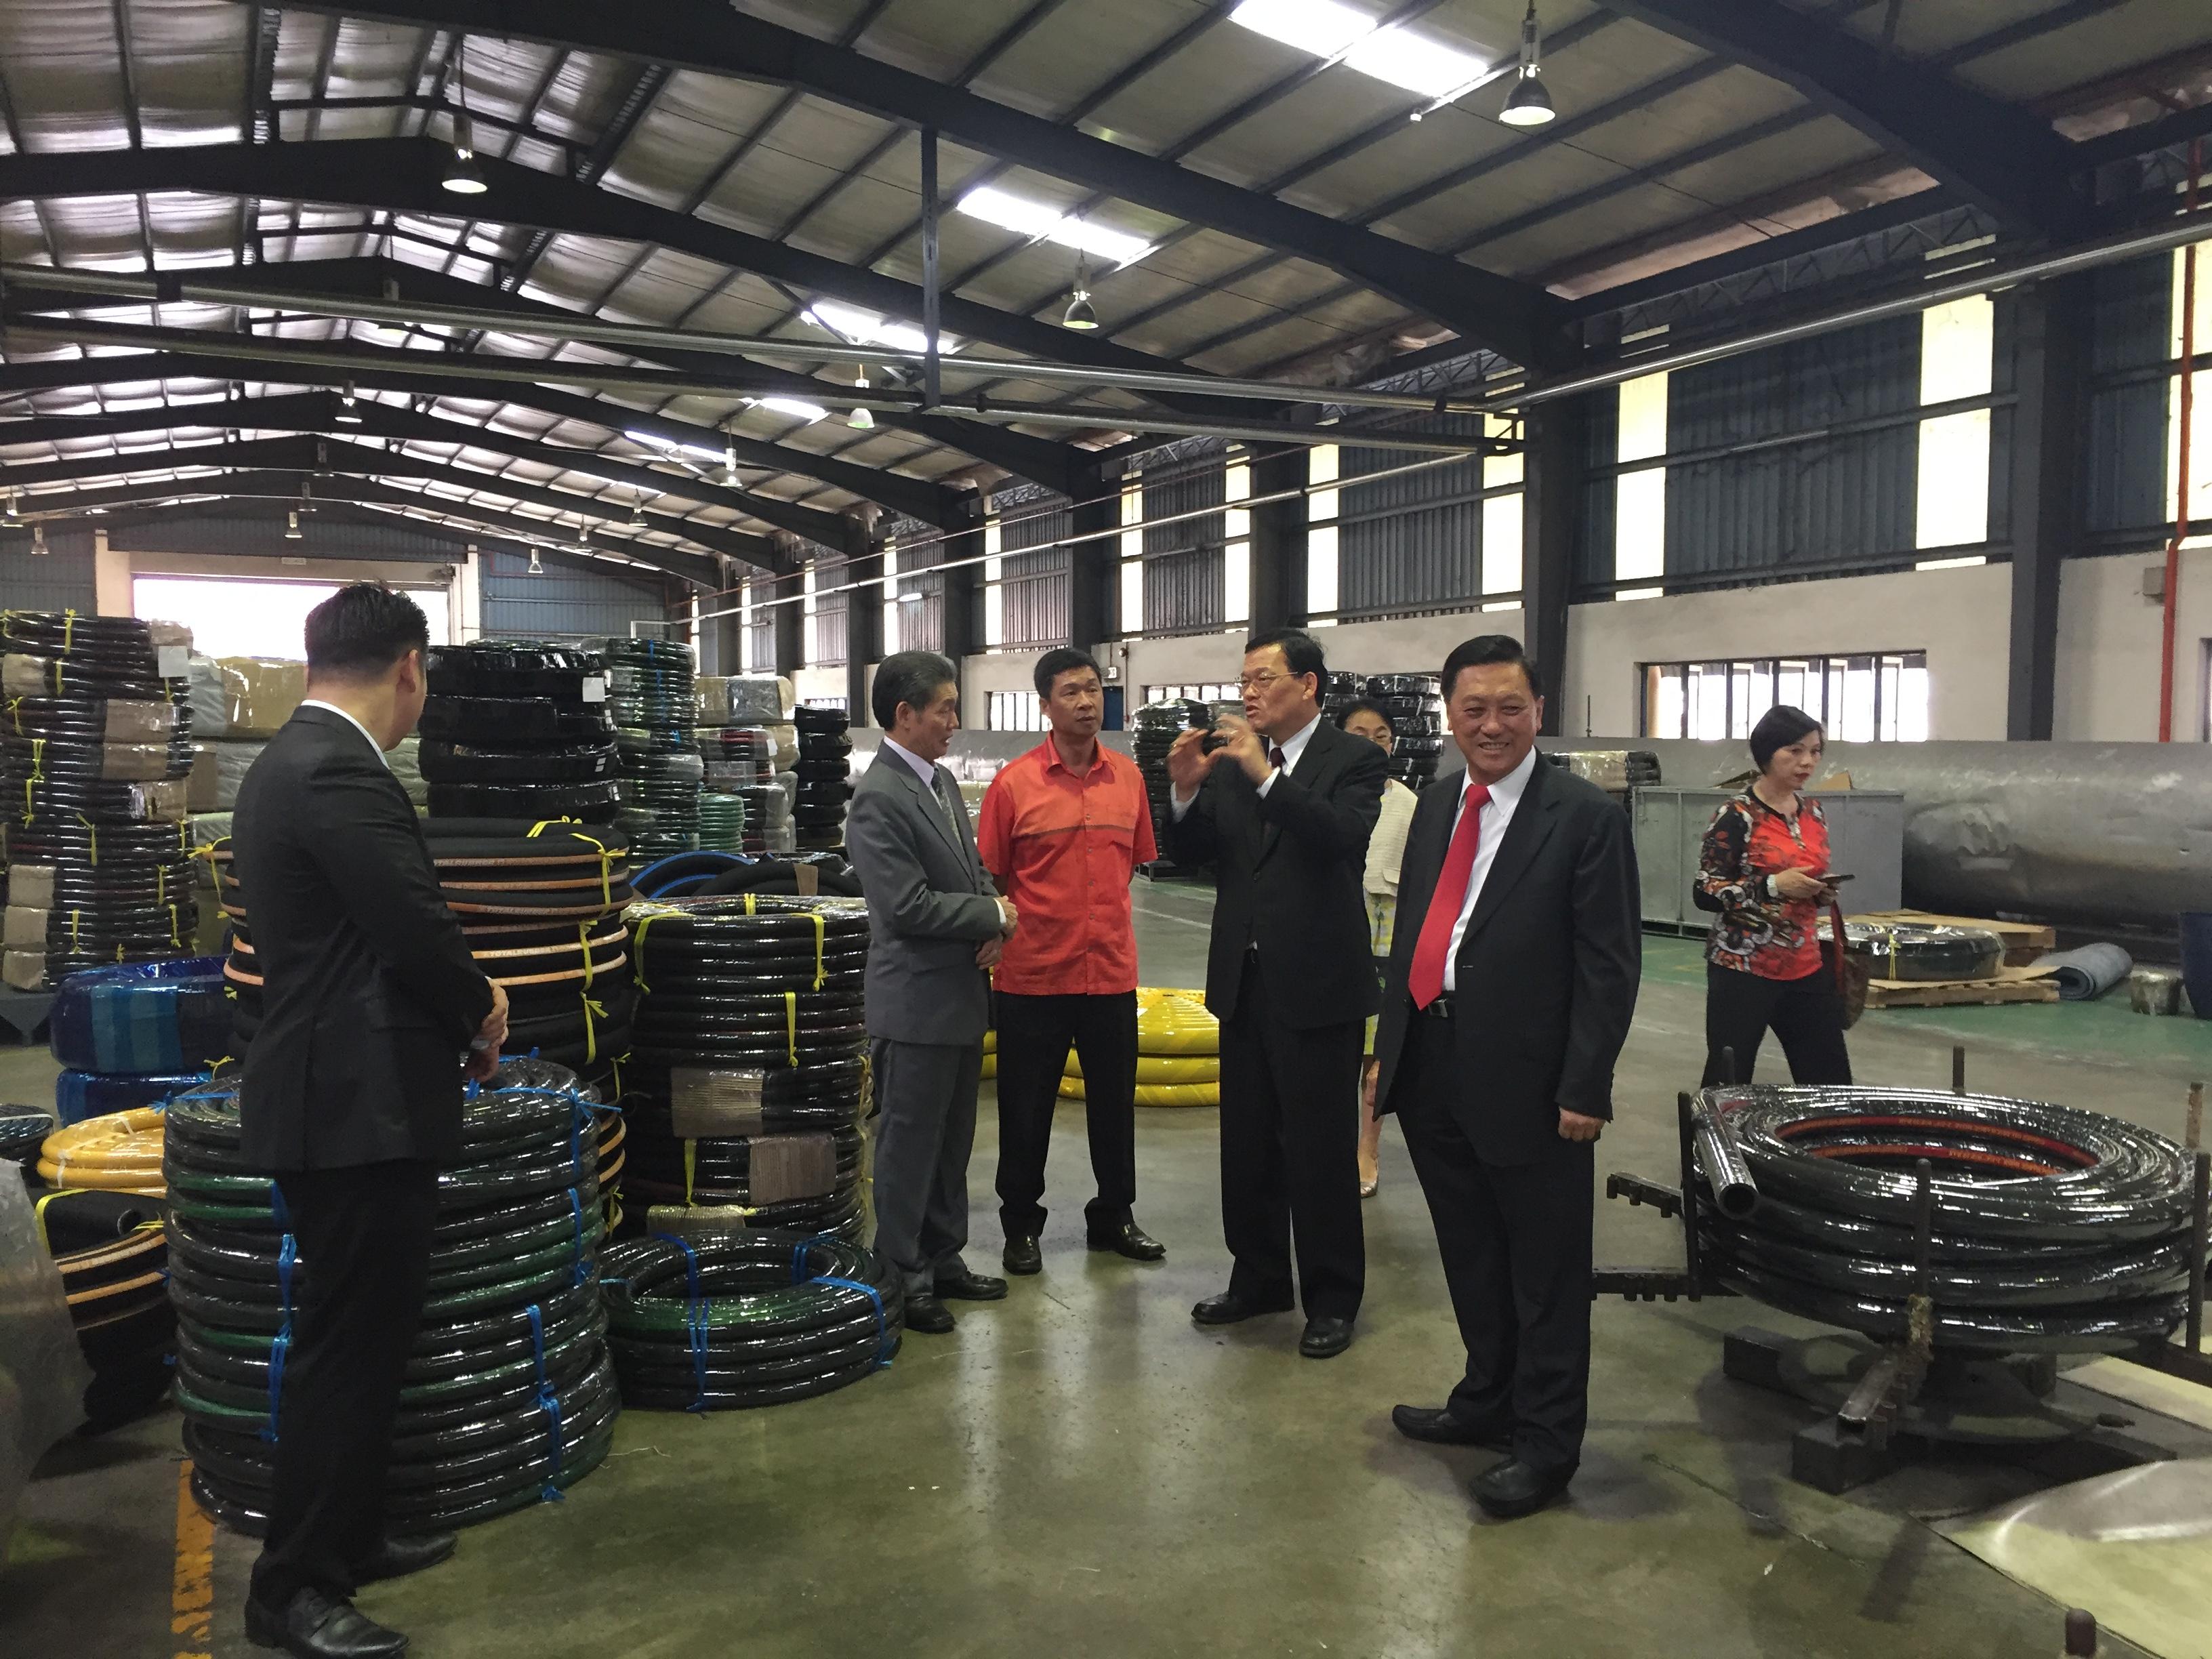 Representative Chang, James Chi-ping (second from right) visits Wellcall Hose Sdn Bhd in the state of Perak in Malaysia on January 15, 2017